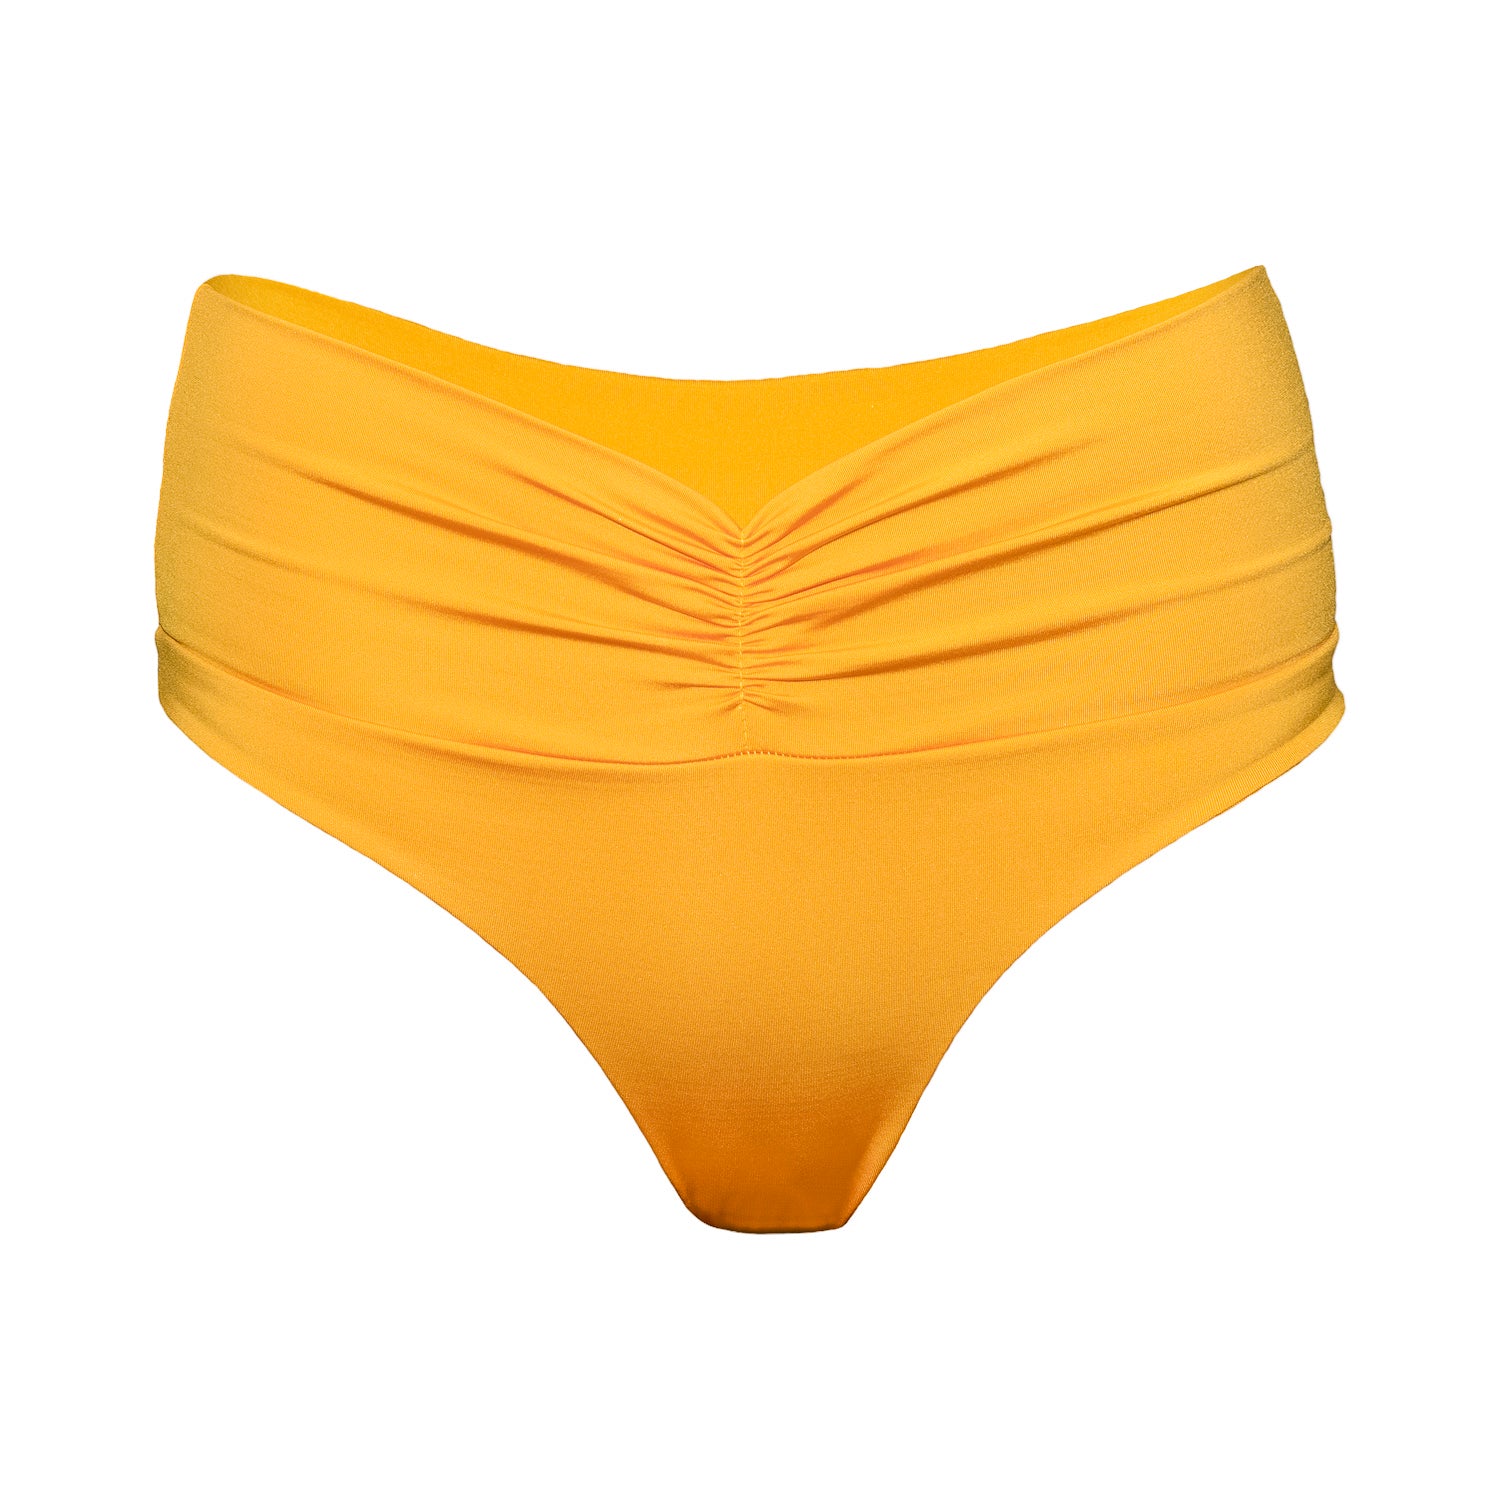 Citrus yellow high waist high cut bikini bottoms with an extra soft touch, fine lining and thick feel. Made sustainably and ethically in Europe from finest polyamide. Perfected fit for every body shape.